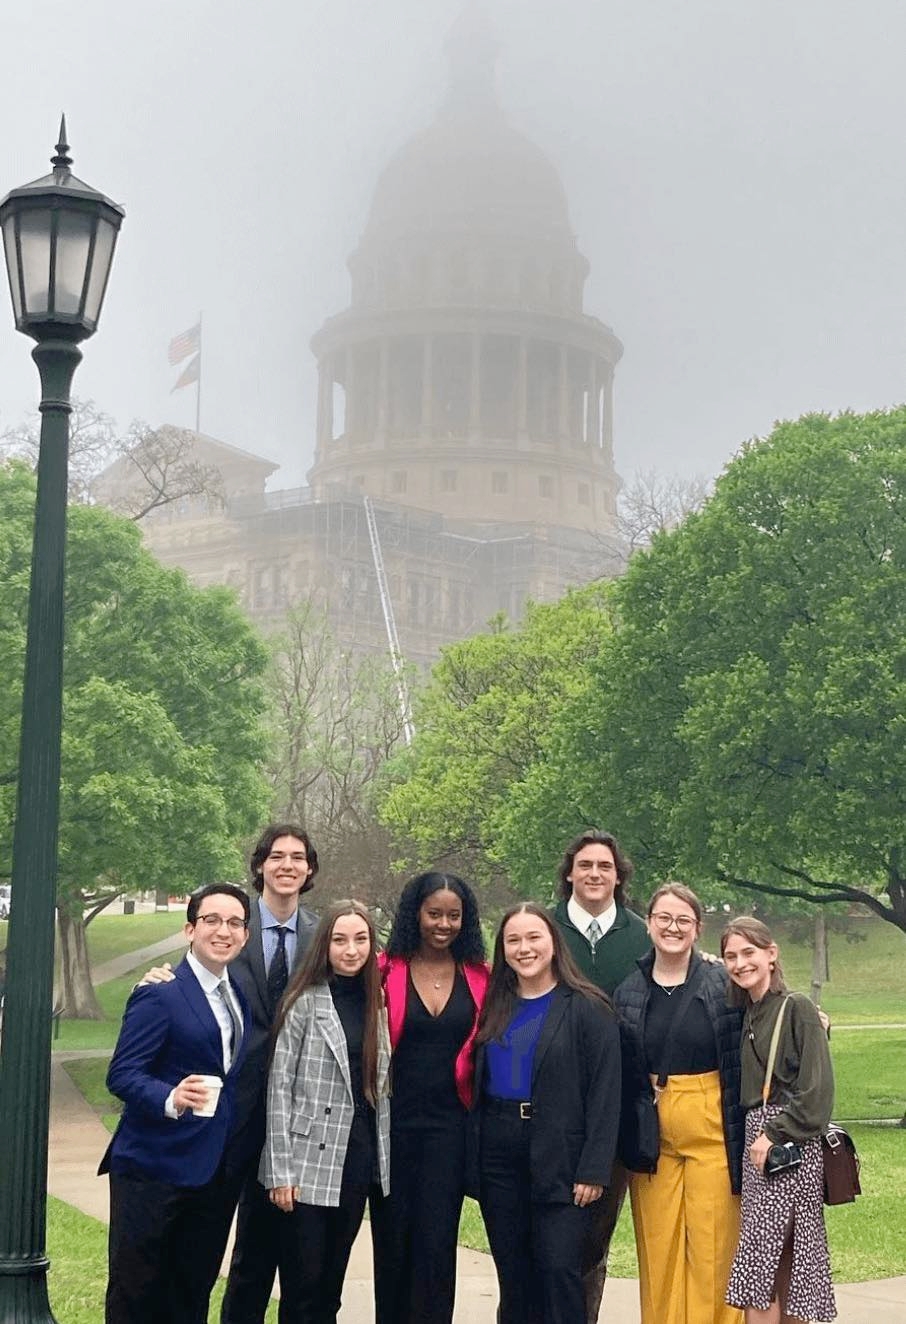 The Advanced Reporting students outside the State Capitol in Austin, Texas.